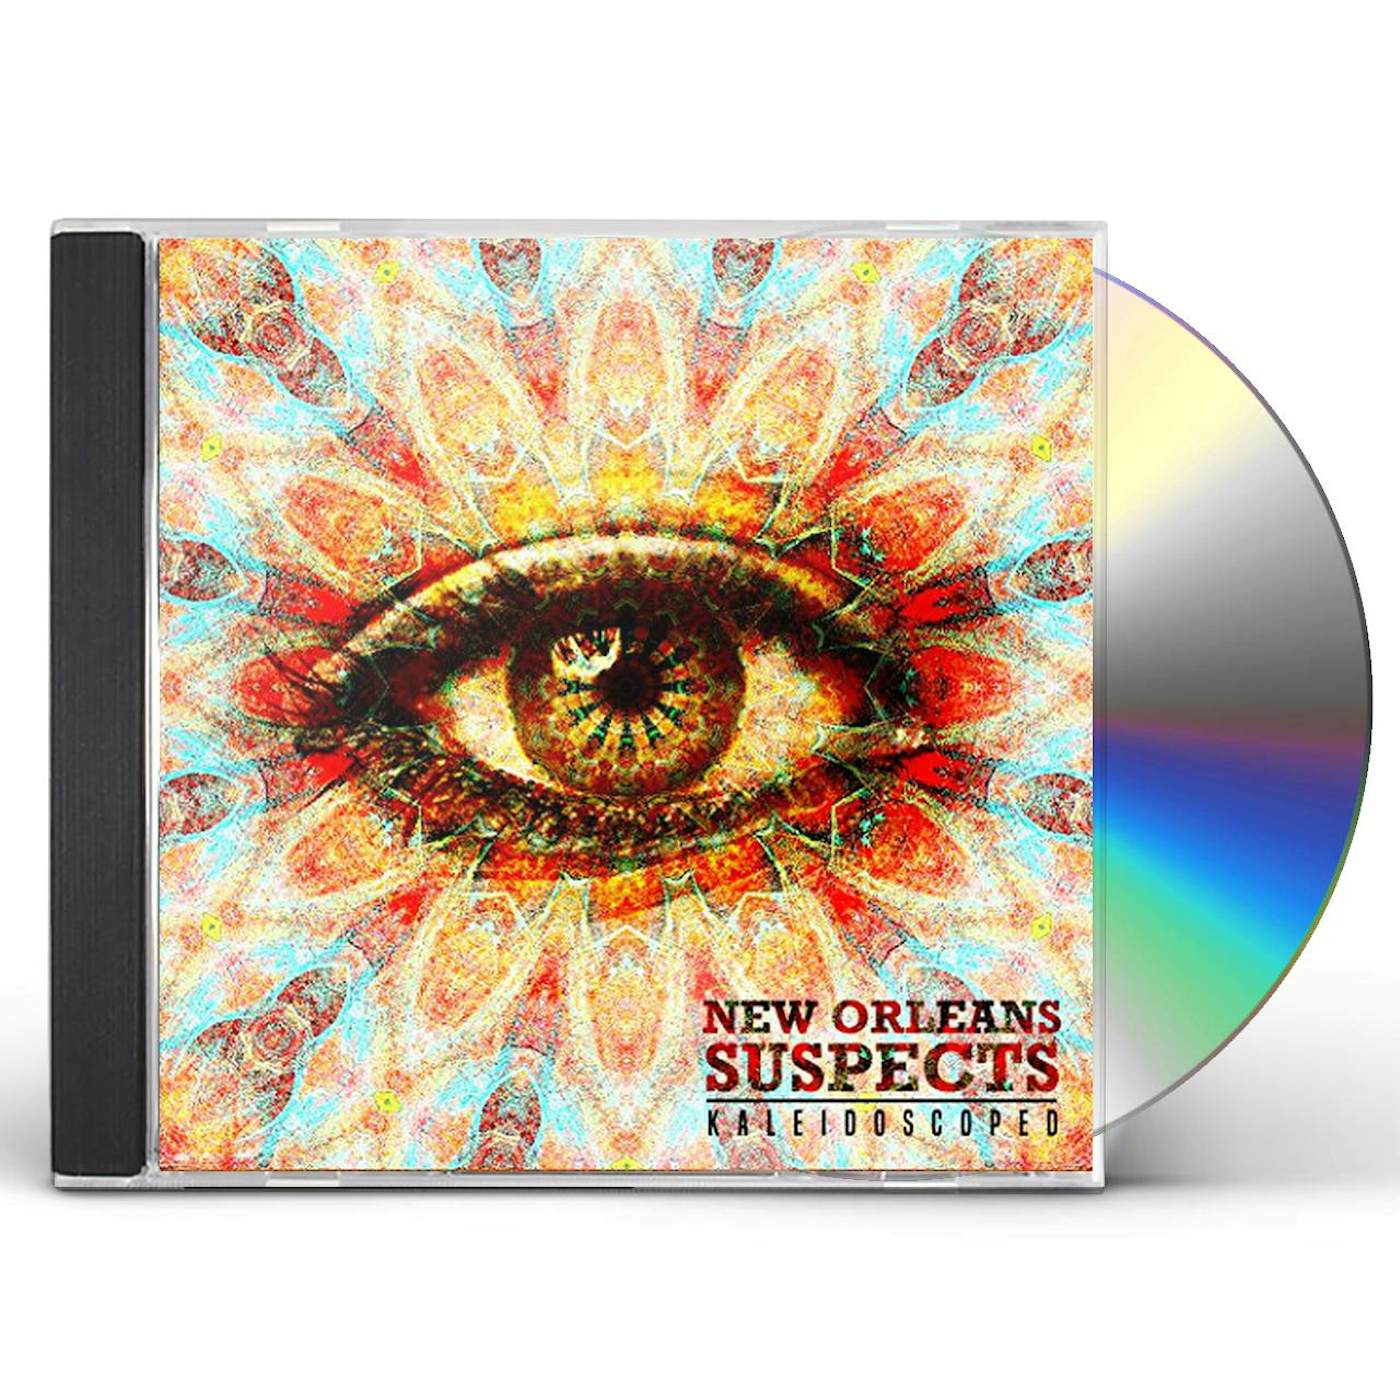 The New Orleans Suspects KALEIDOSCOPED CD